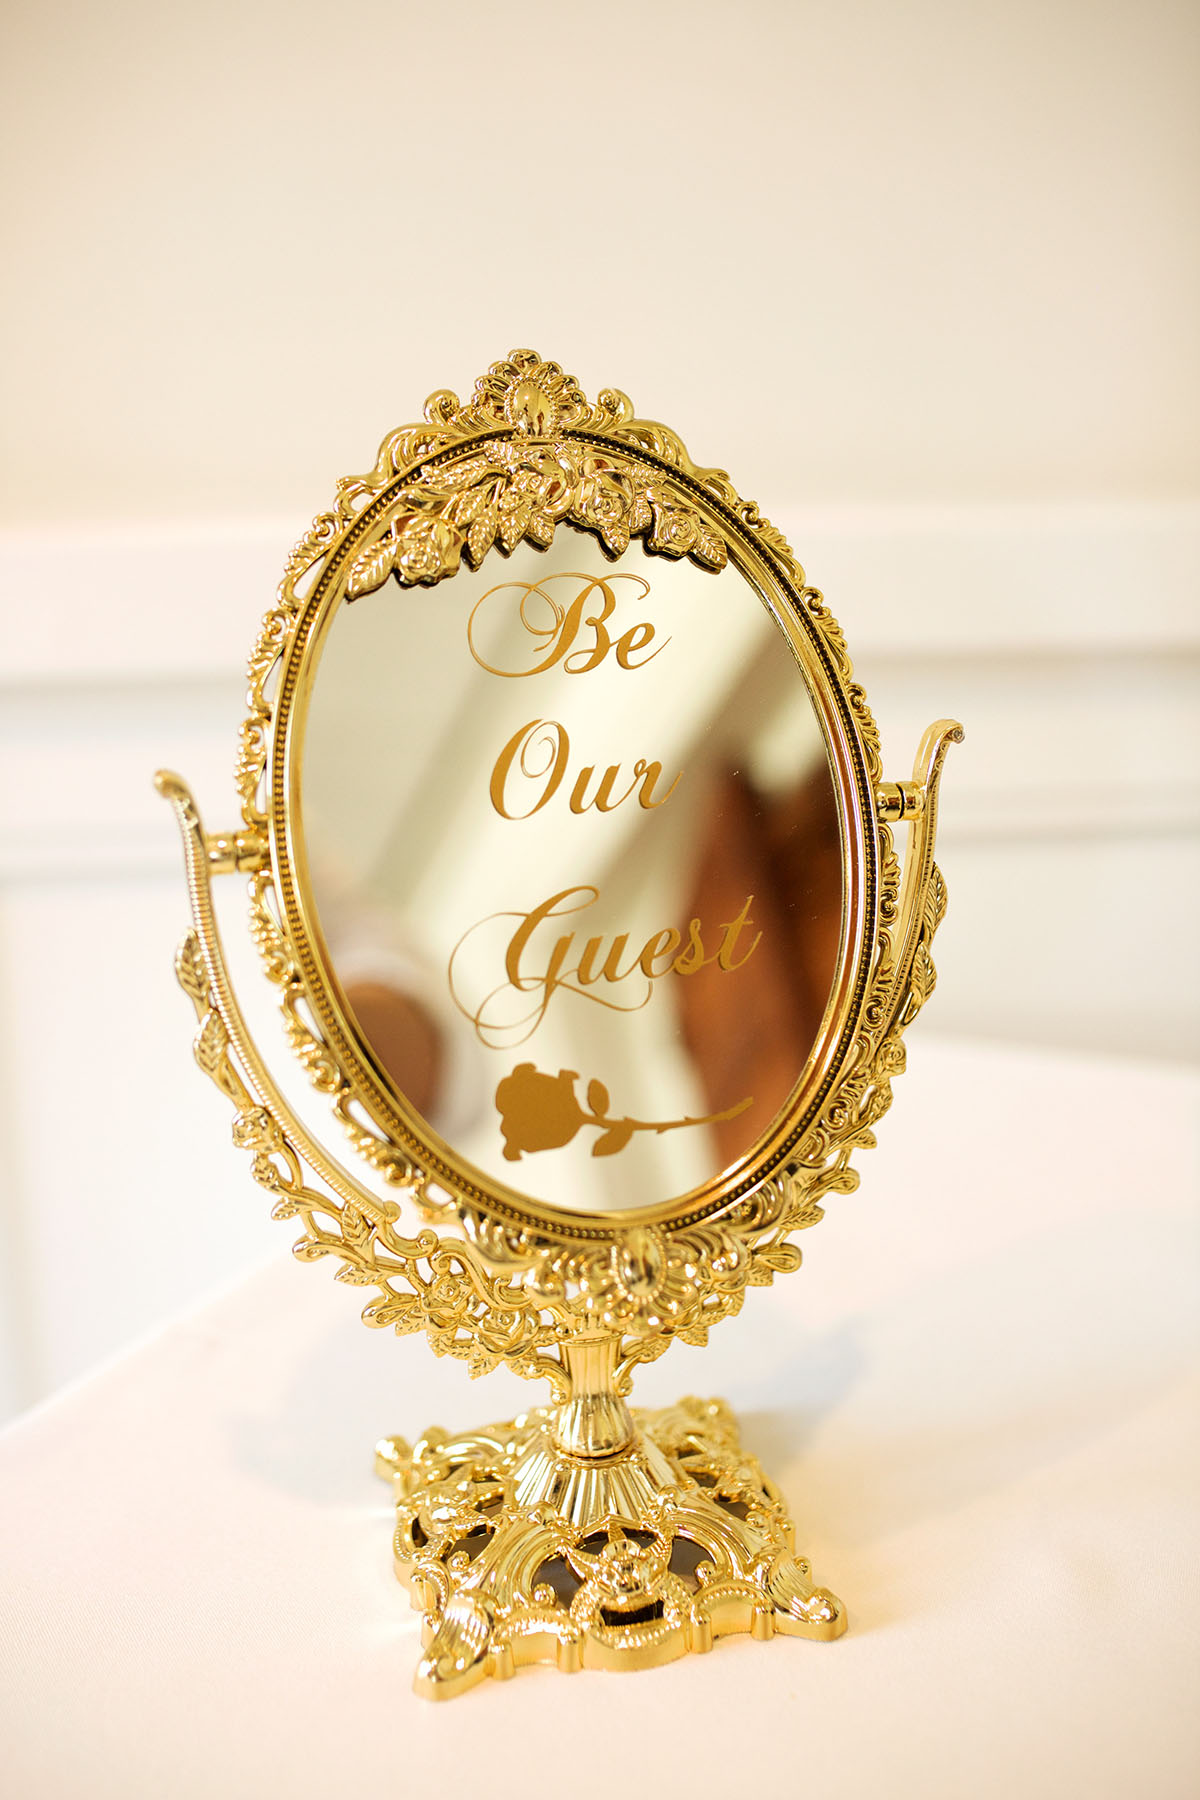 You'll want to a be a guest at this couple's Beauty and the Beast inspired wedding be our guest mirror